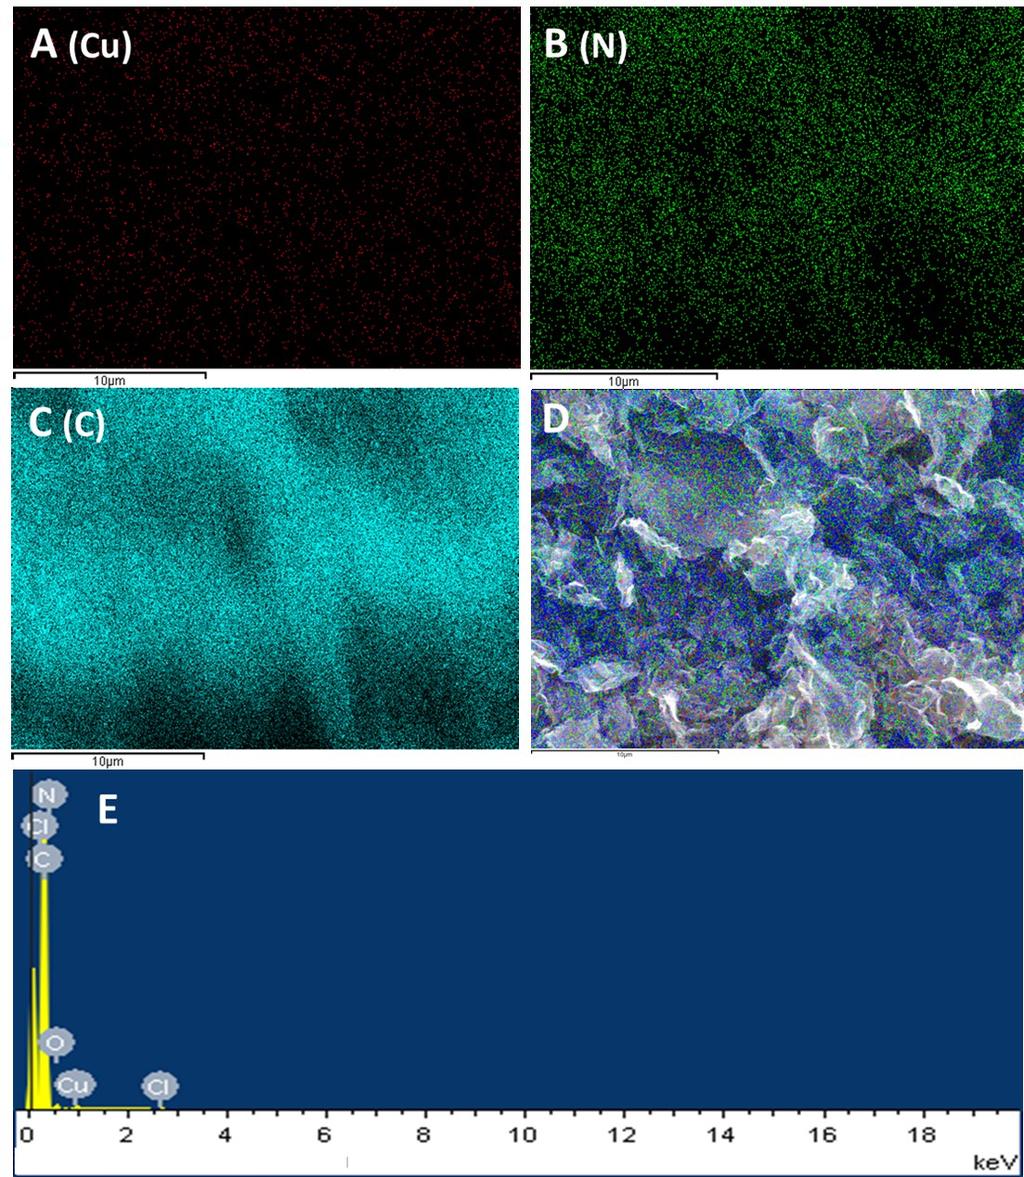 Figure S6 The SEM-EDS mapping images for Cu (A), N (B), C (C) and total element mapping image for Cu, N, C, O and Cl (D), and the SEM EDS spectrum